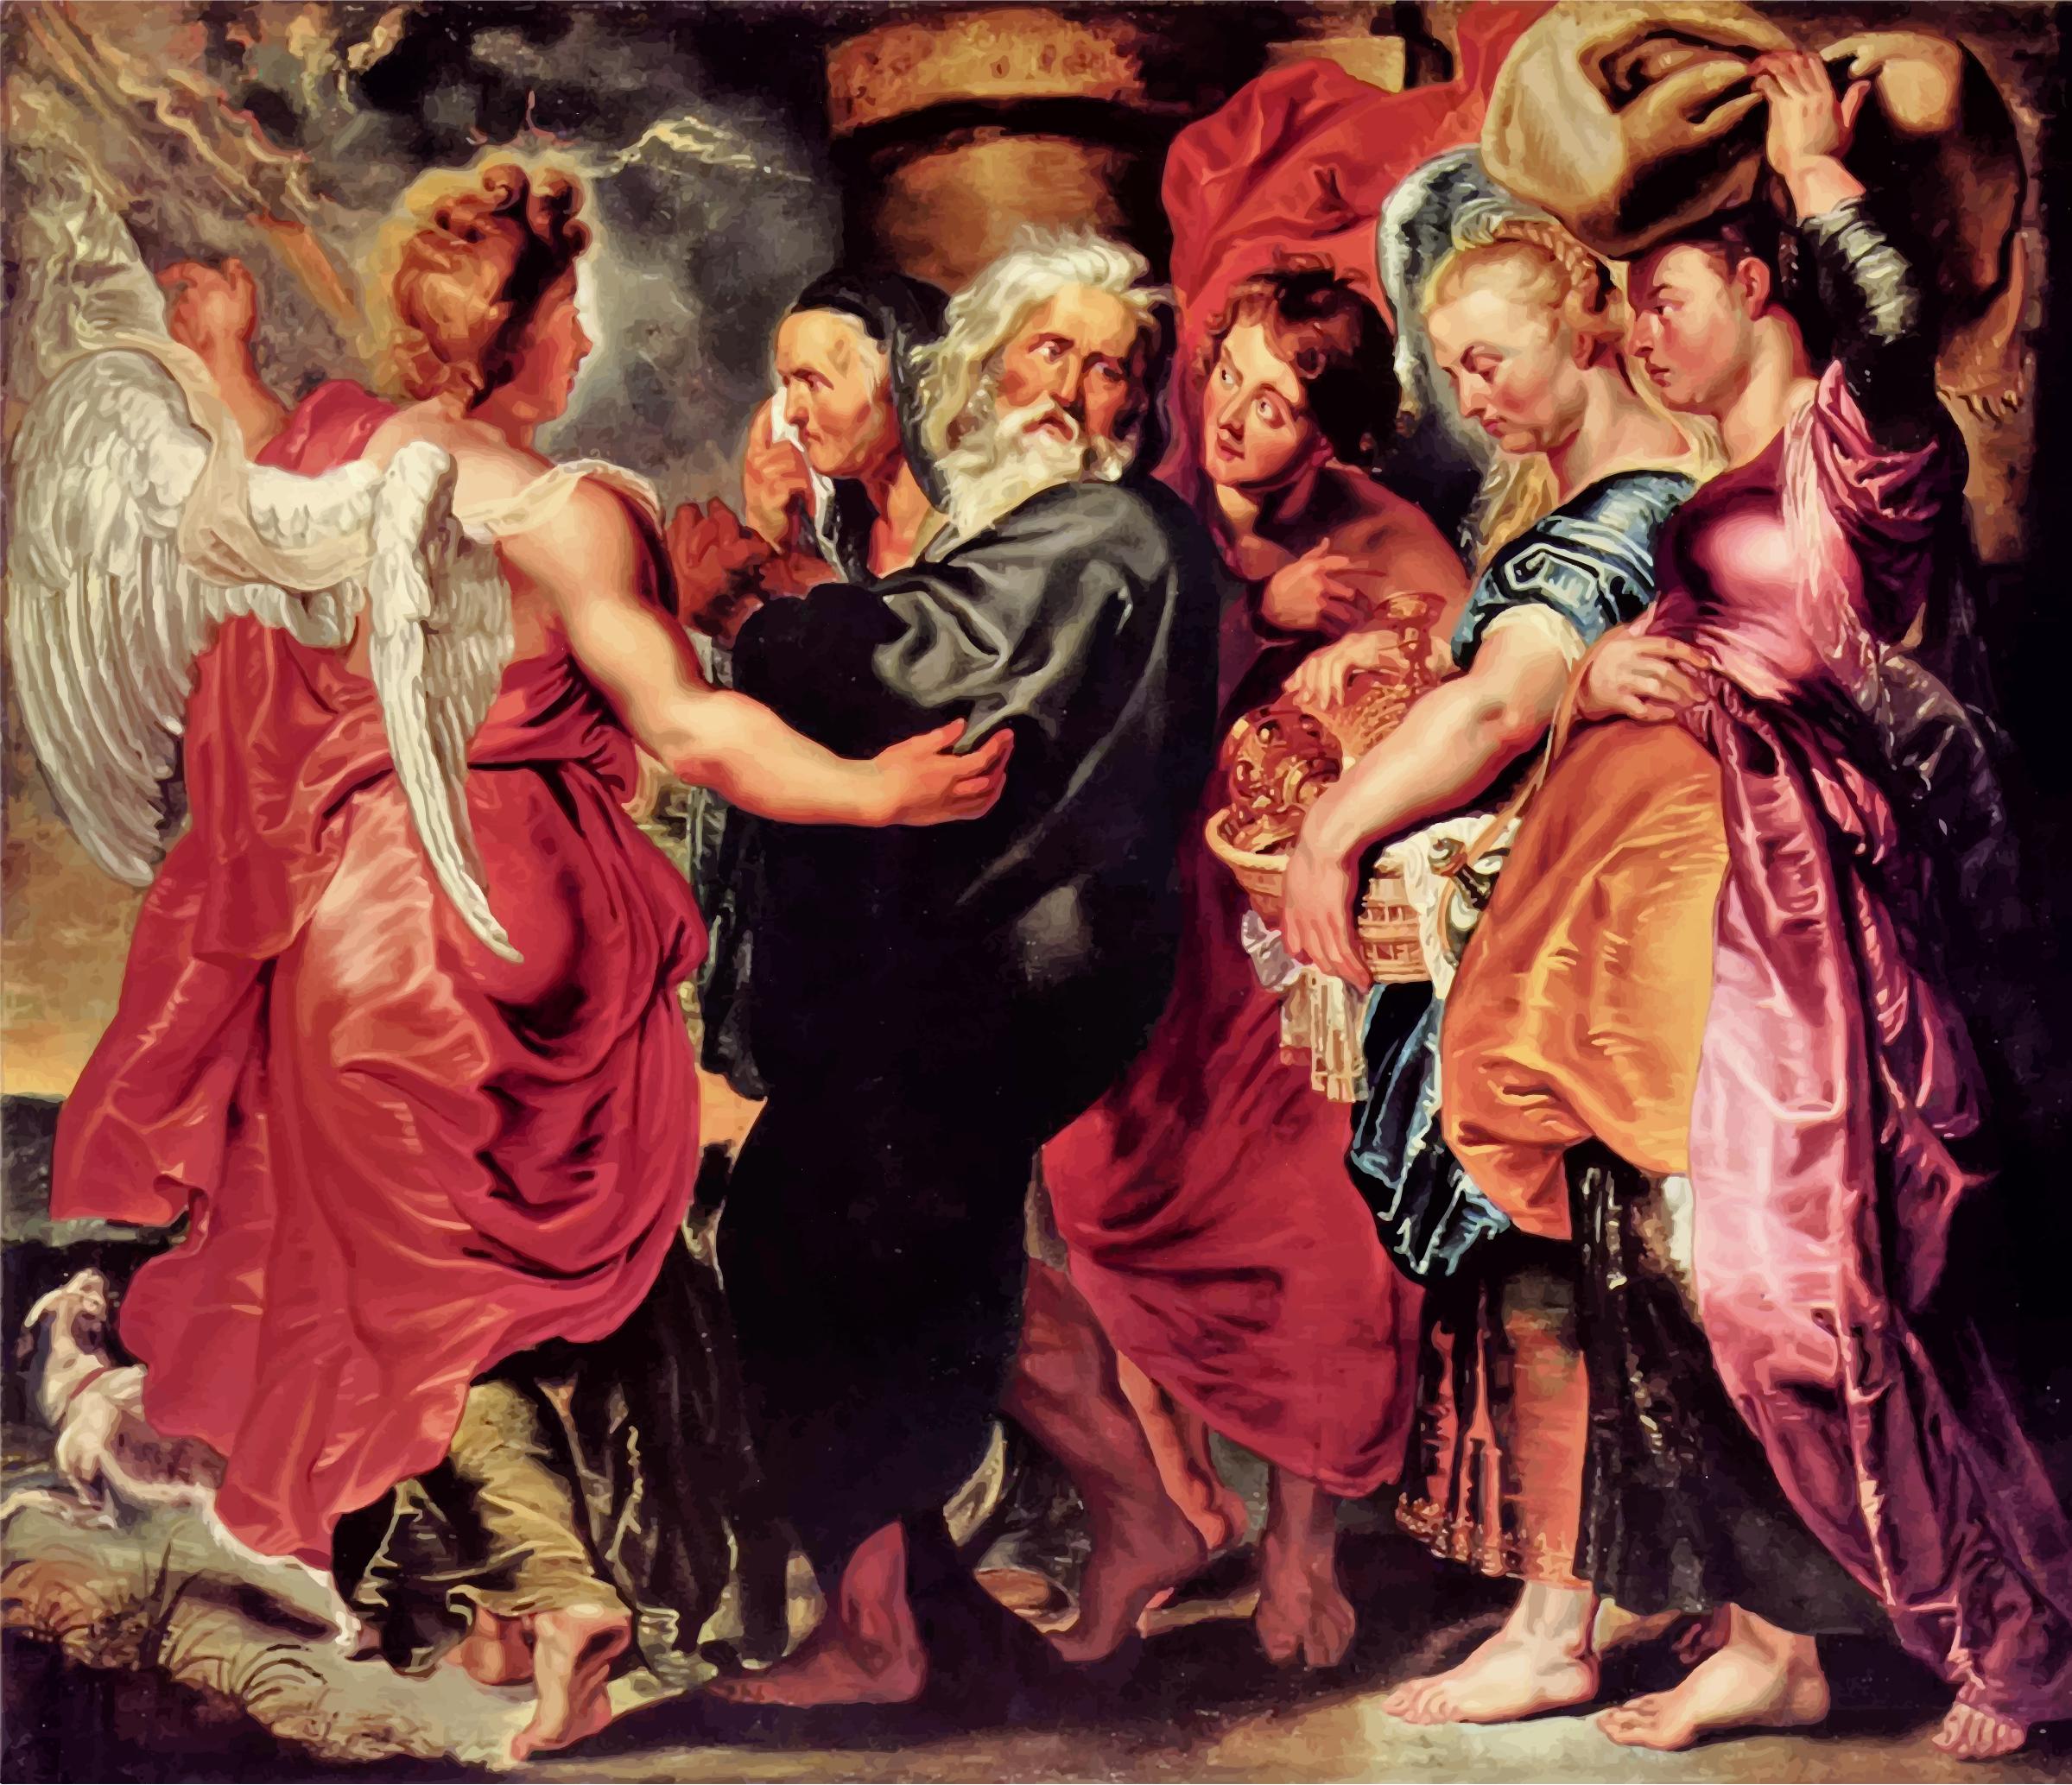 Lot Leaves Sodom with His Family By Peter Paul Rubens PNG icons